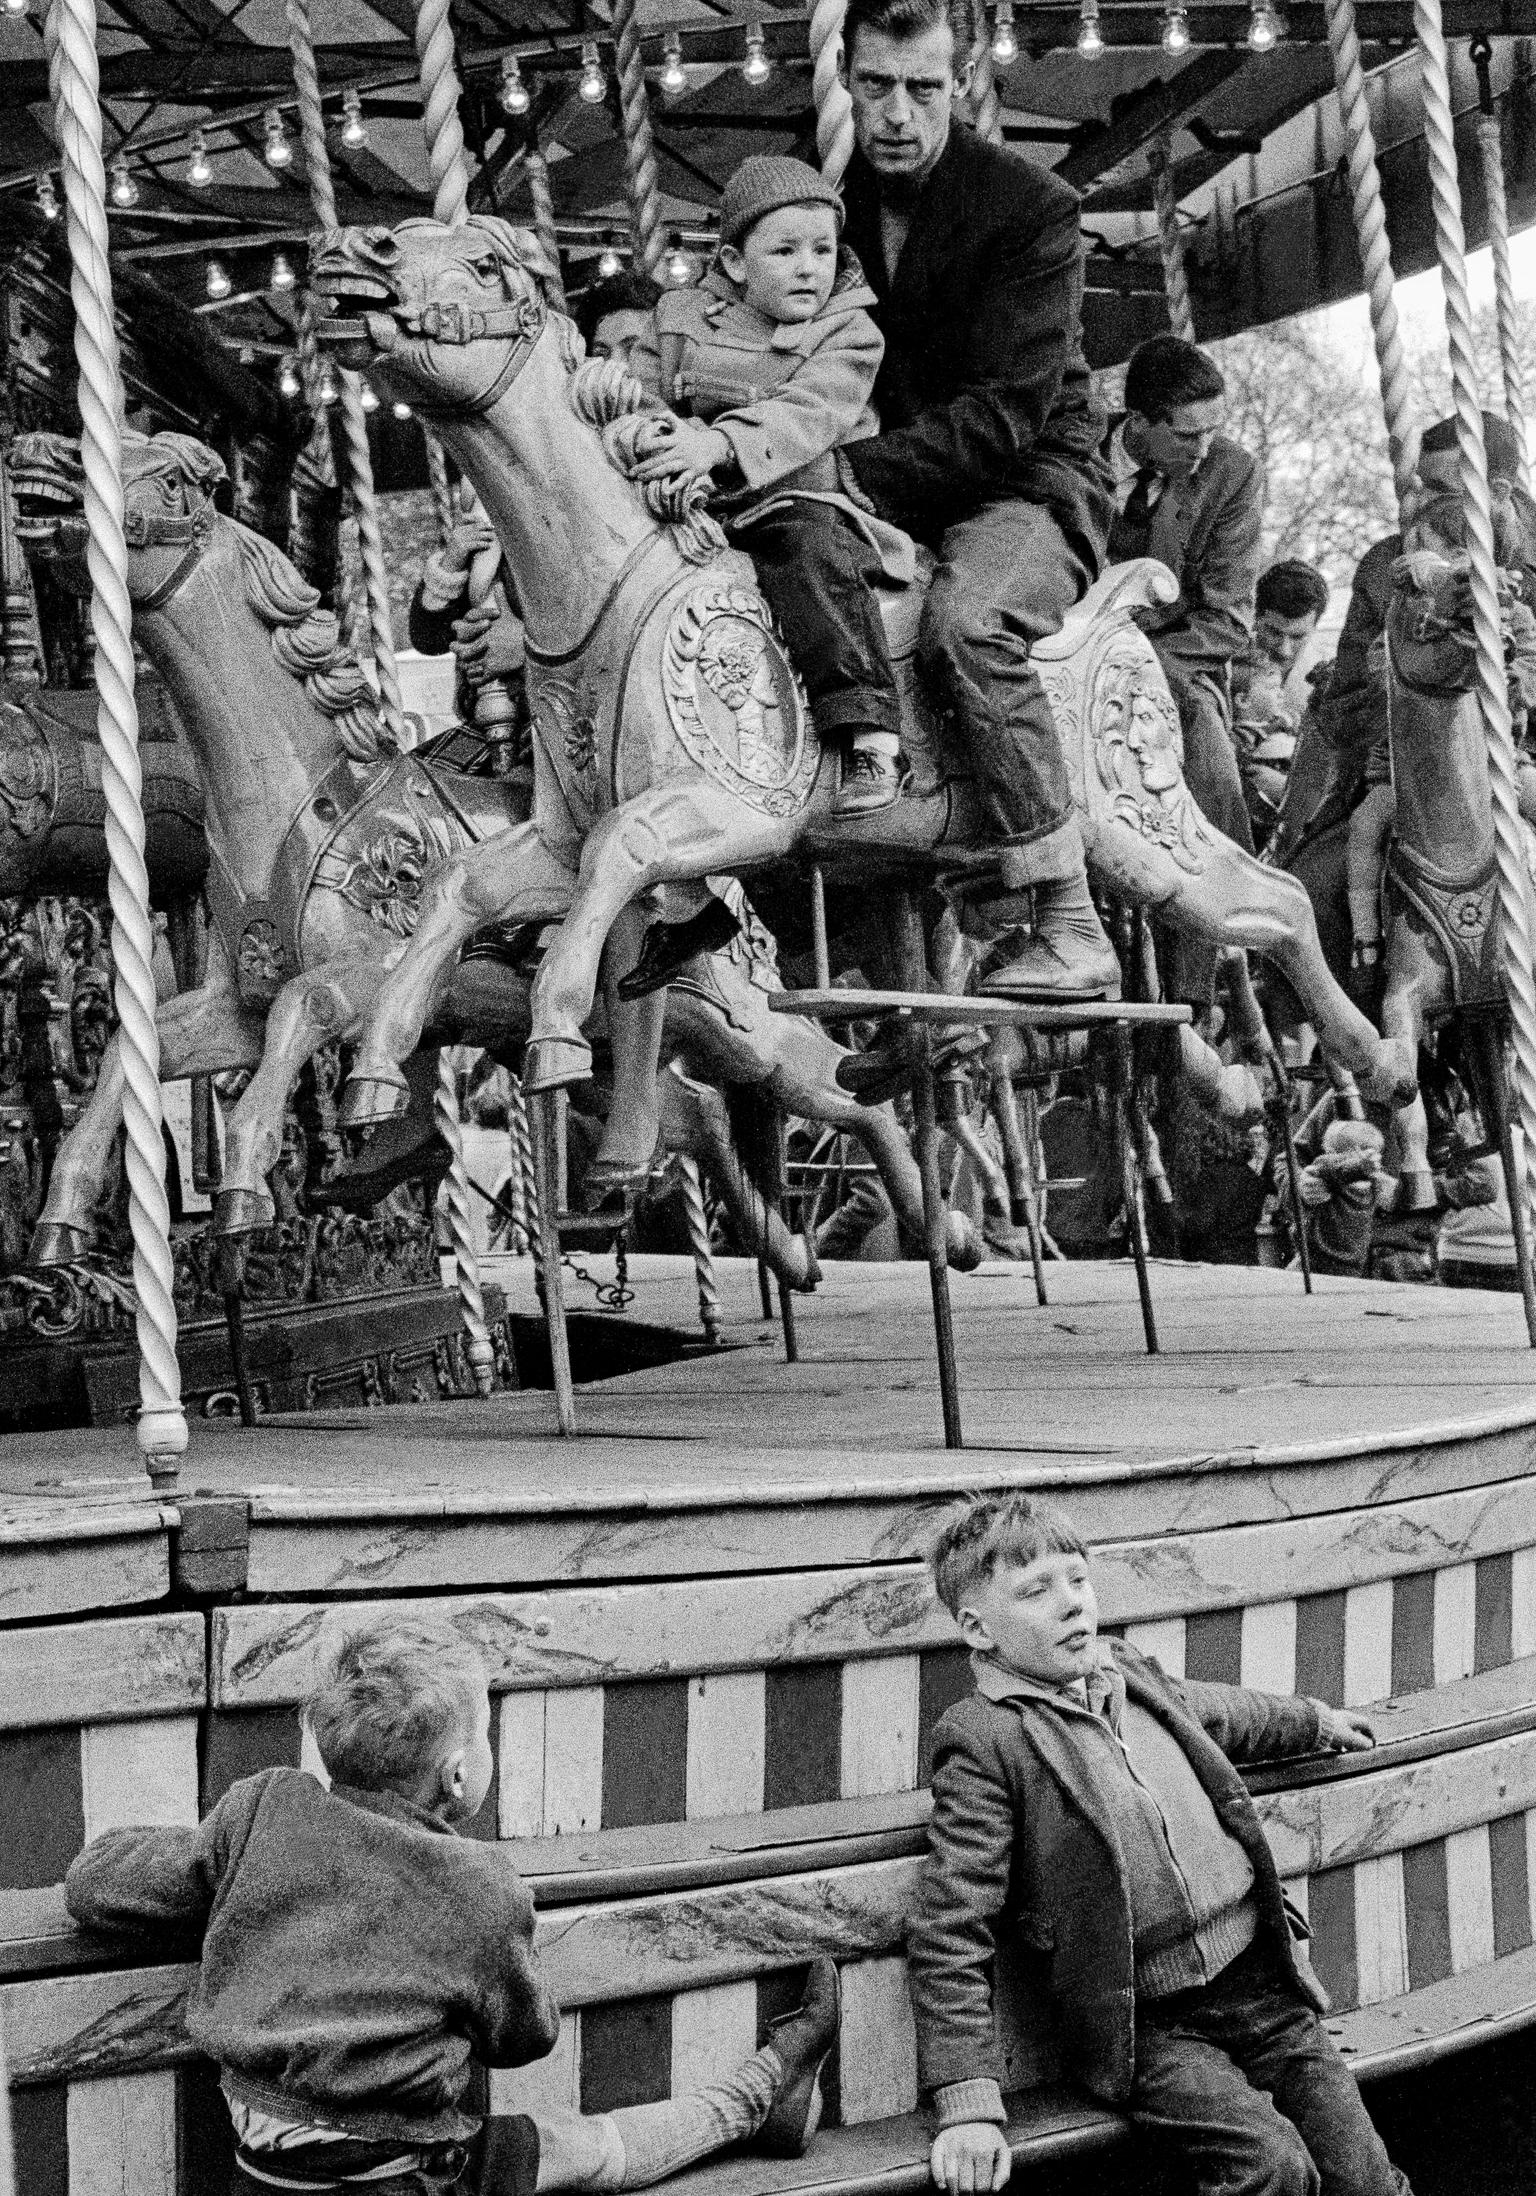 The annual bank holiday fair on Hampstead Heath in North London. The traditional Carousel. Taken on a Contax 2 camera (first professional camera)